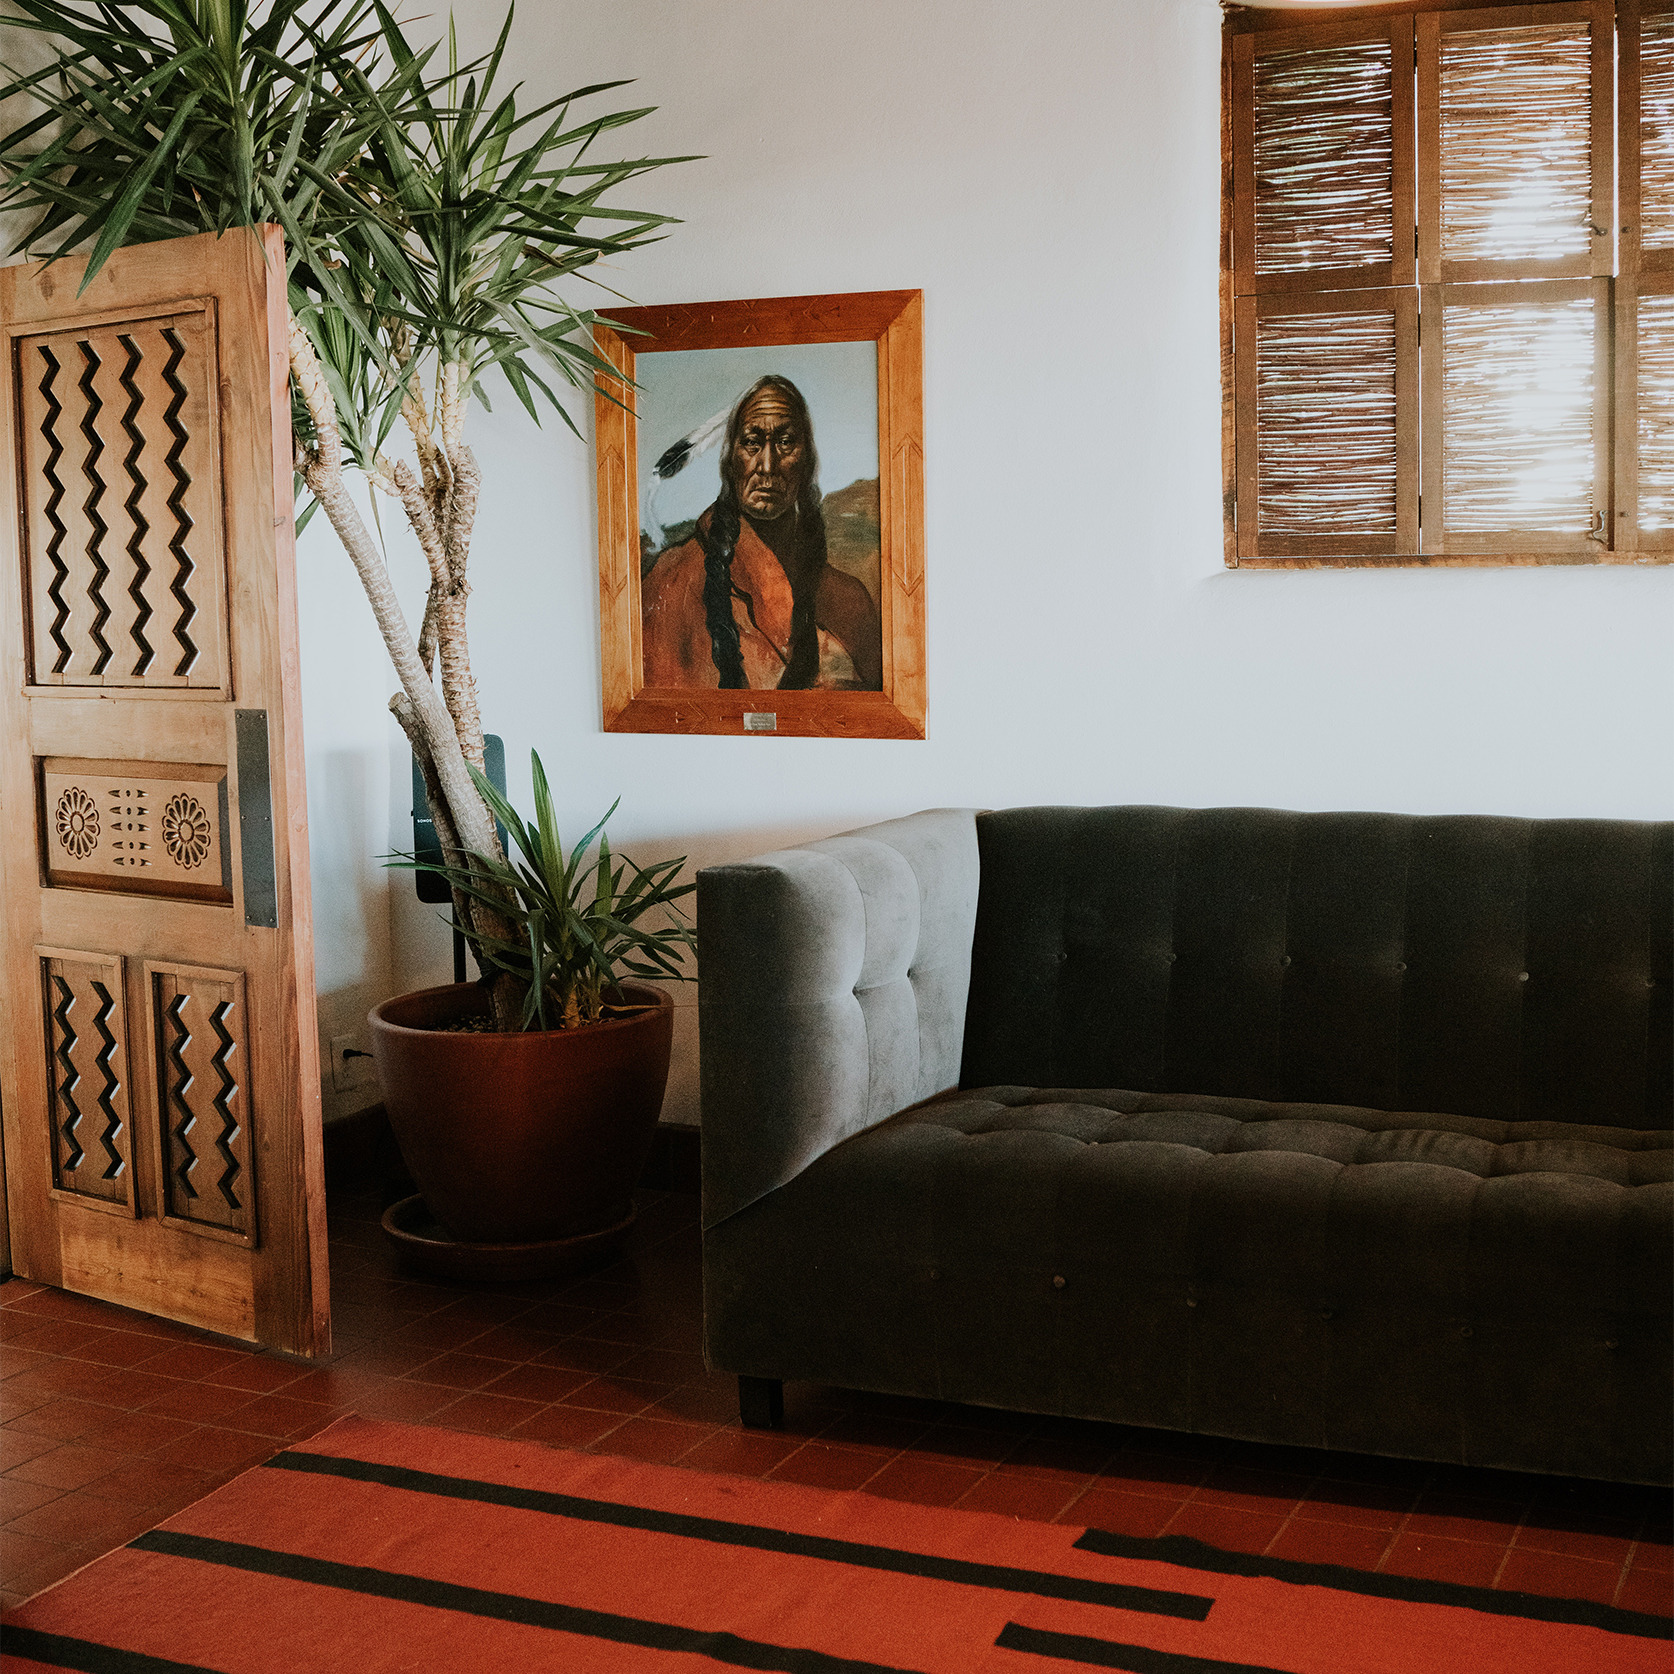 An ethnic furnished corner of a house with a painting of a Native American hanging on the wall, a beautifully carved wooden door and a sofa.